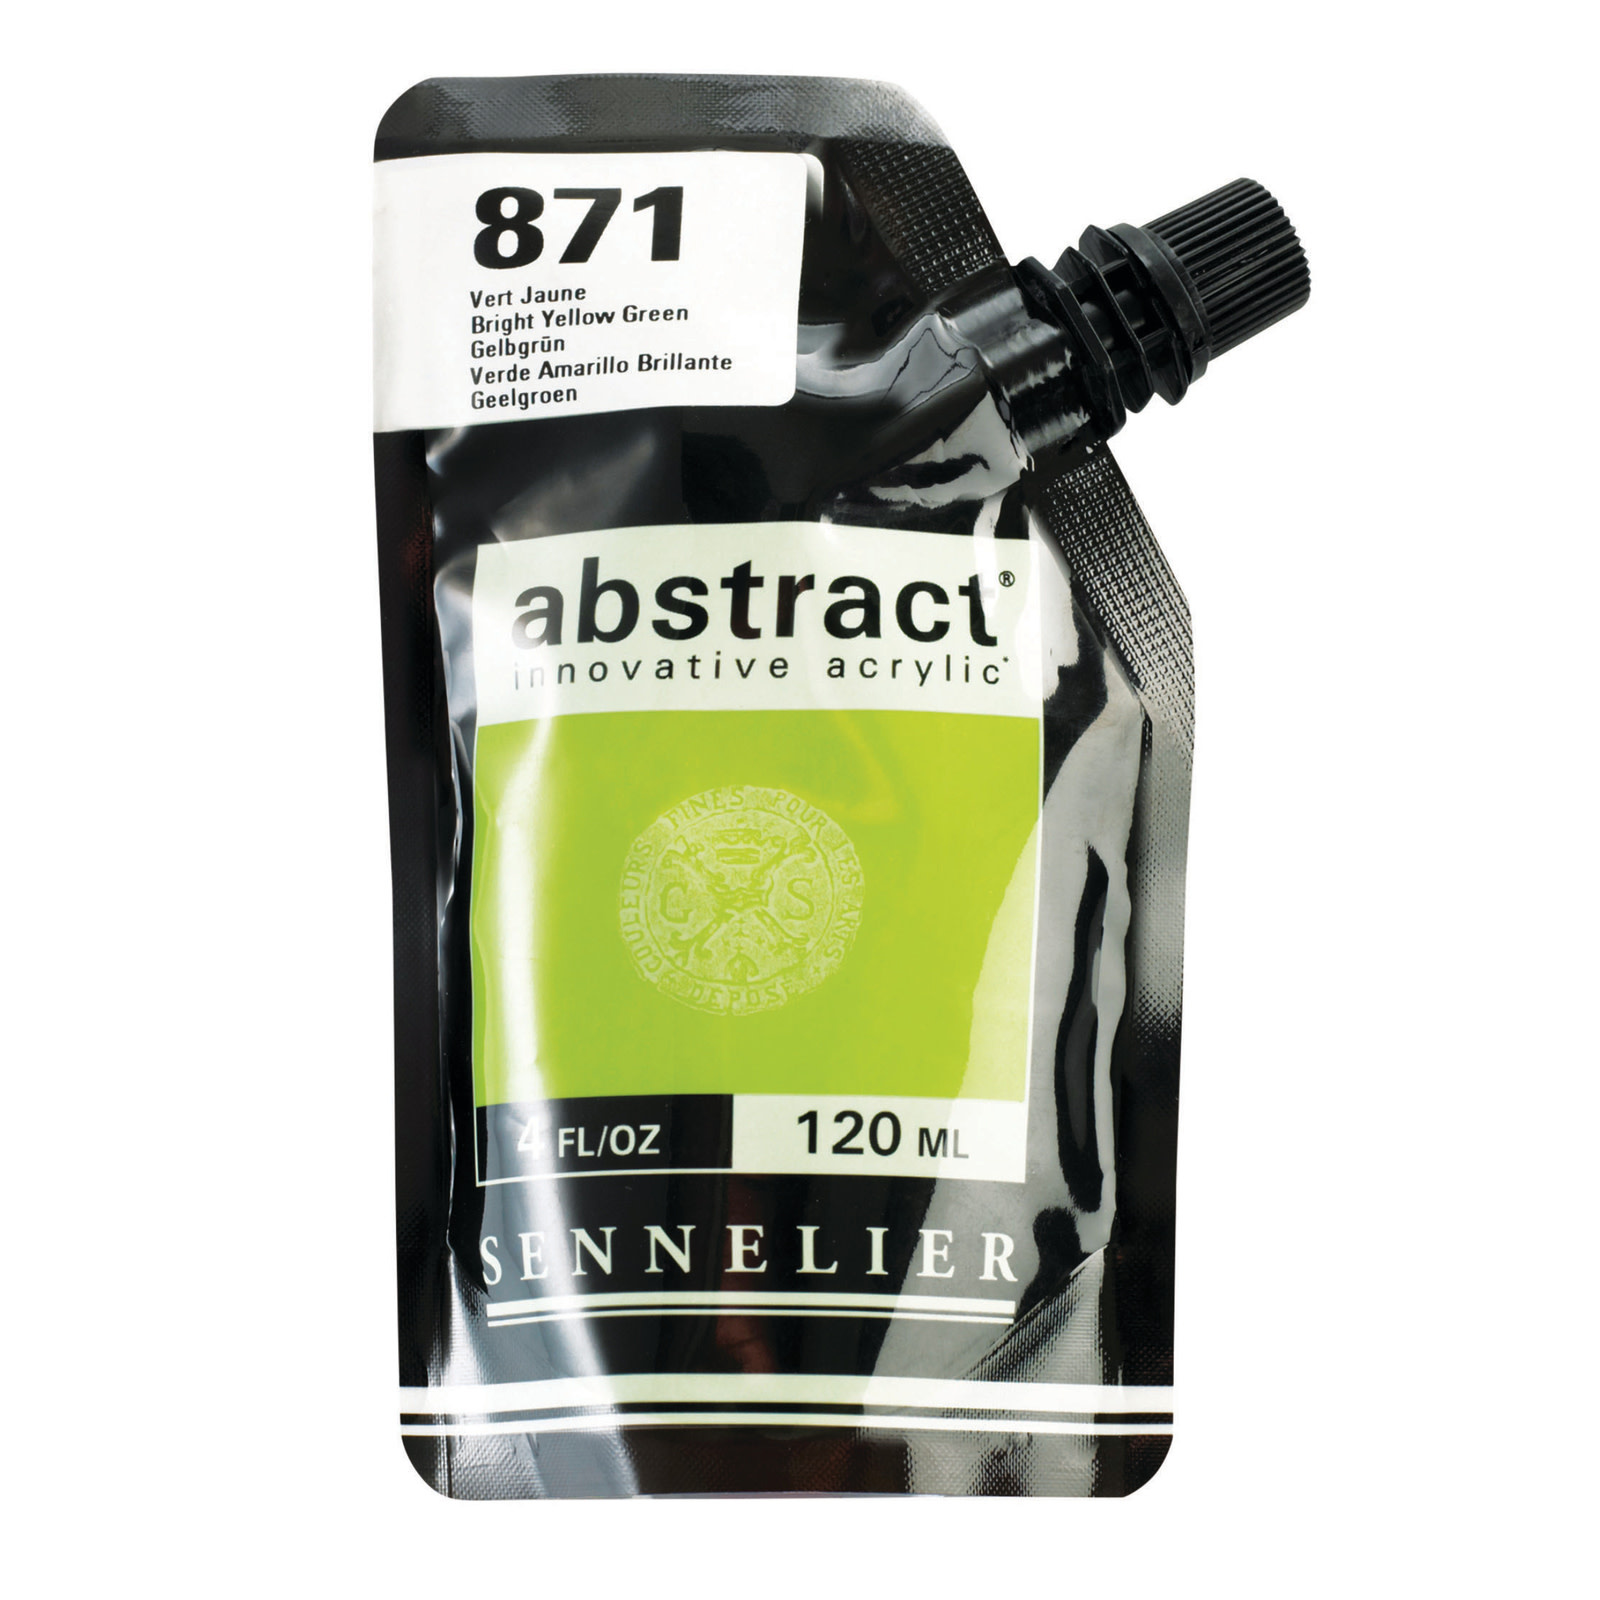 Sennelier Abstract Acrylics 120ML Bright Yellow Green